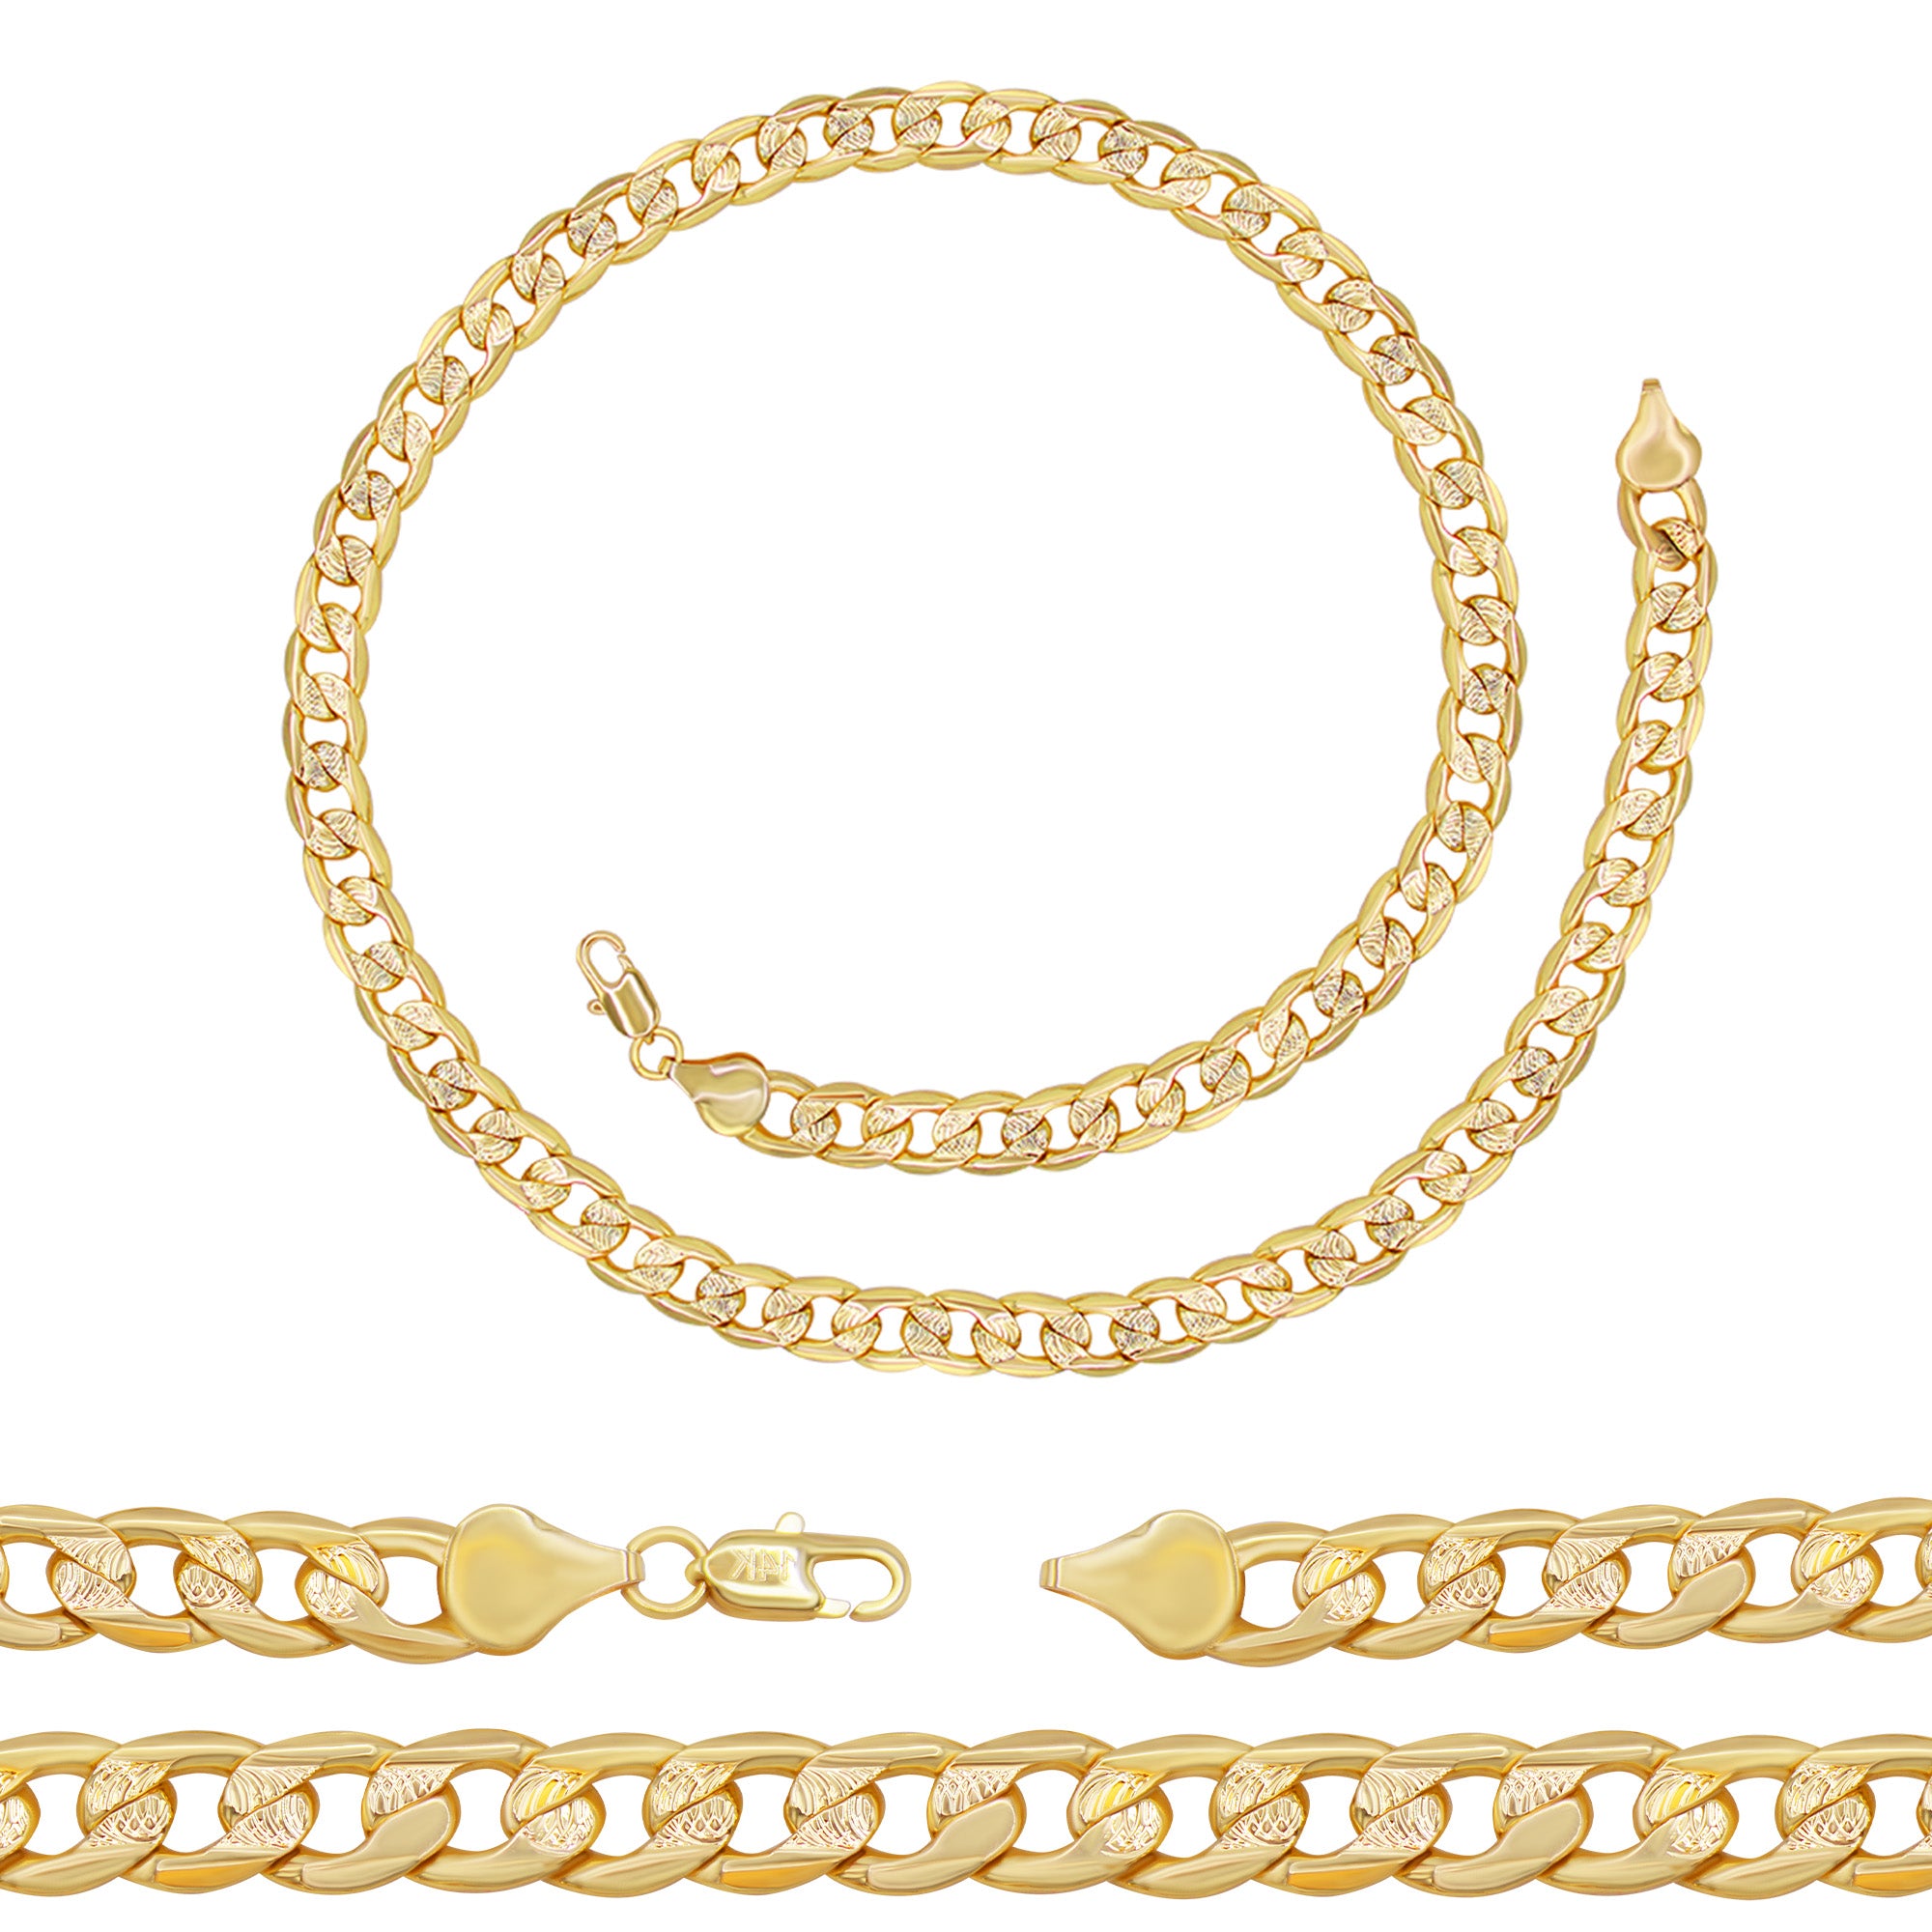 3mm Diamond Cut Franco Chain, 14K White Gold, Proclamation Jewelry 24 / Luxury Lobster Clasp